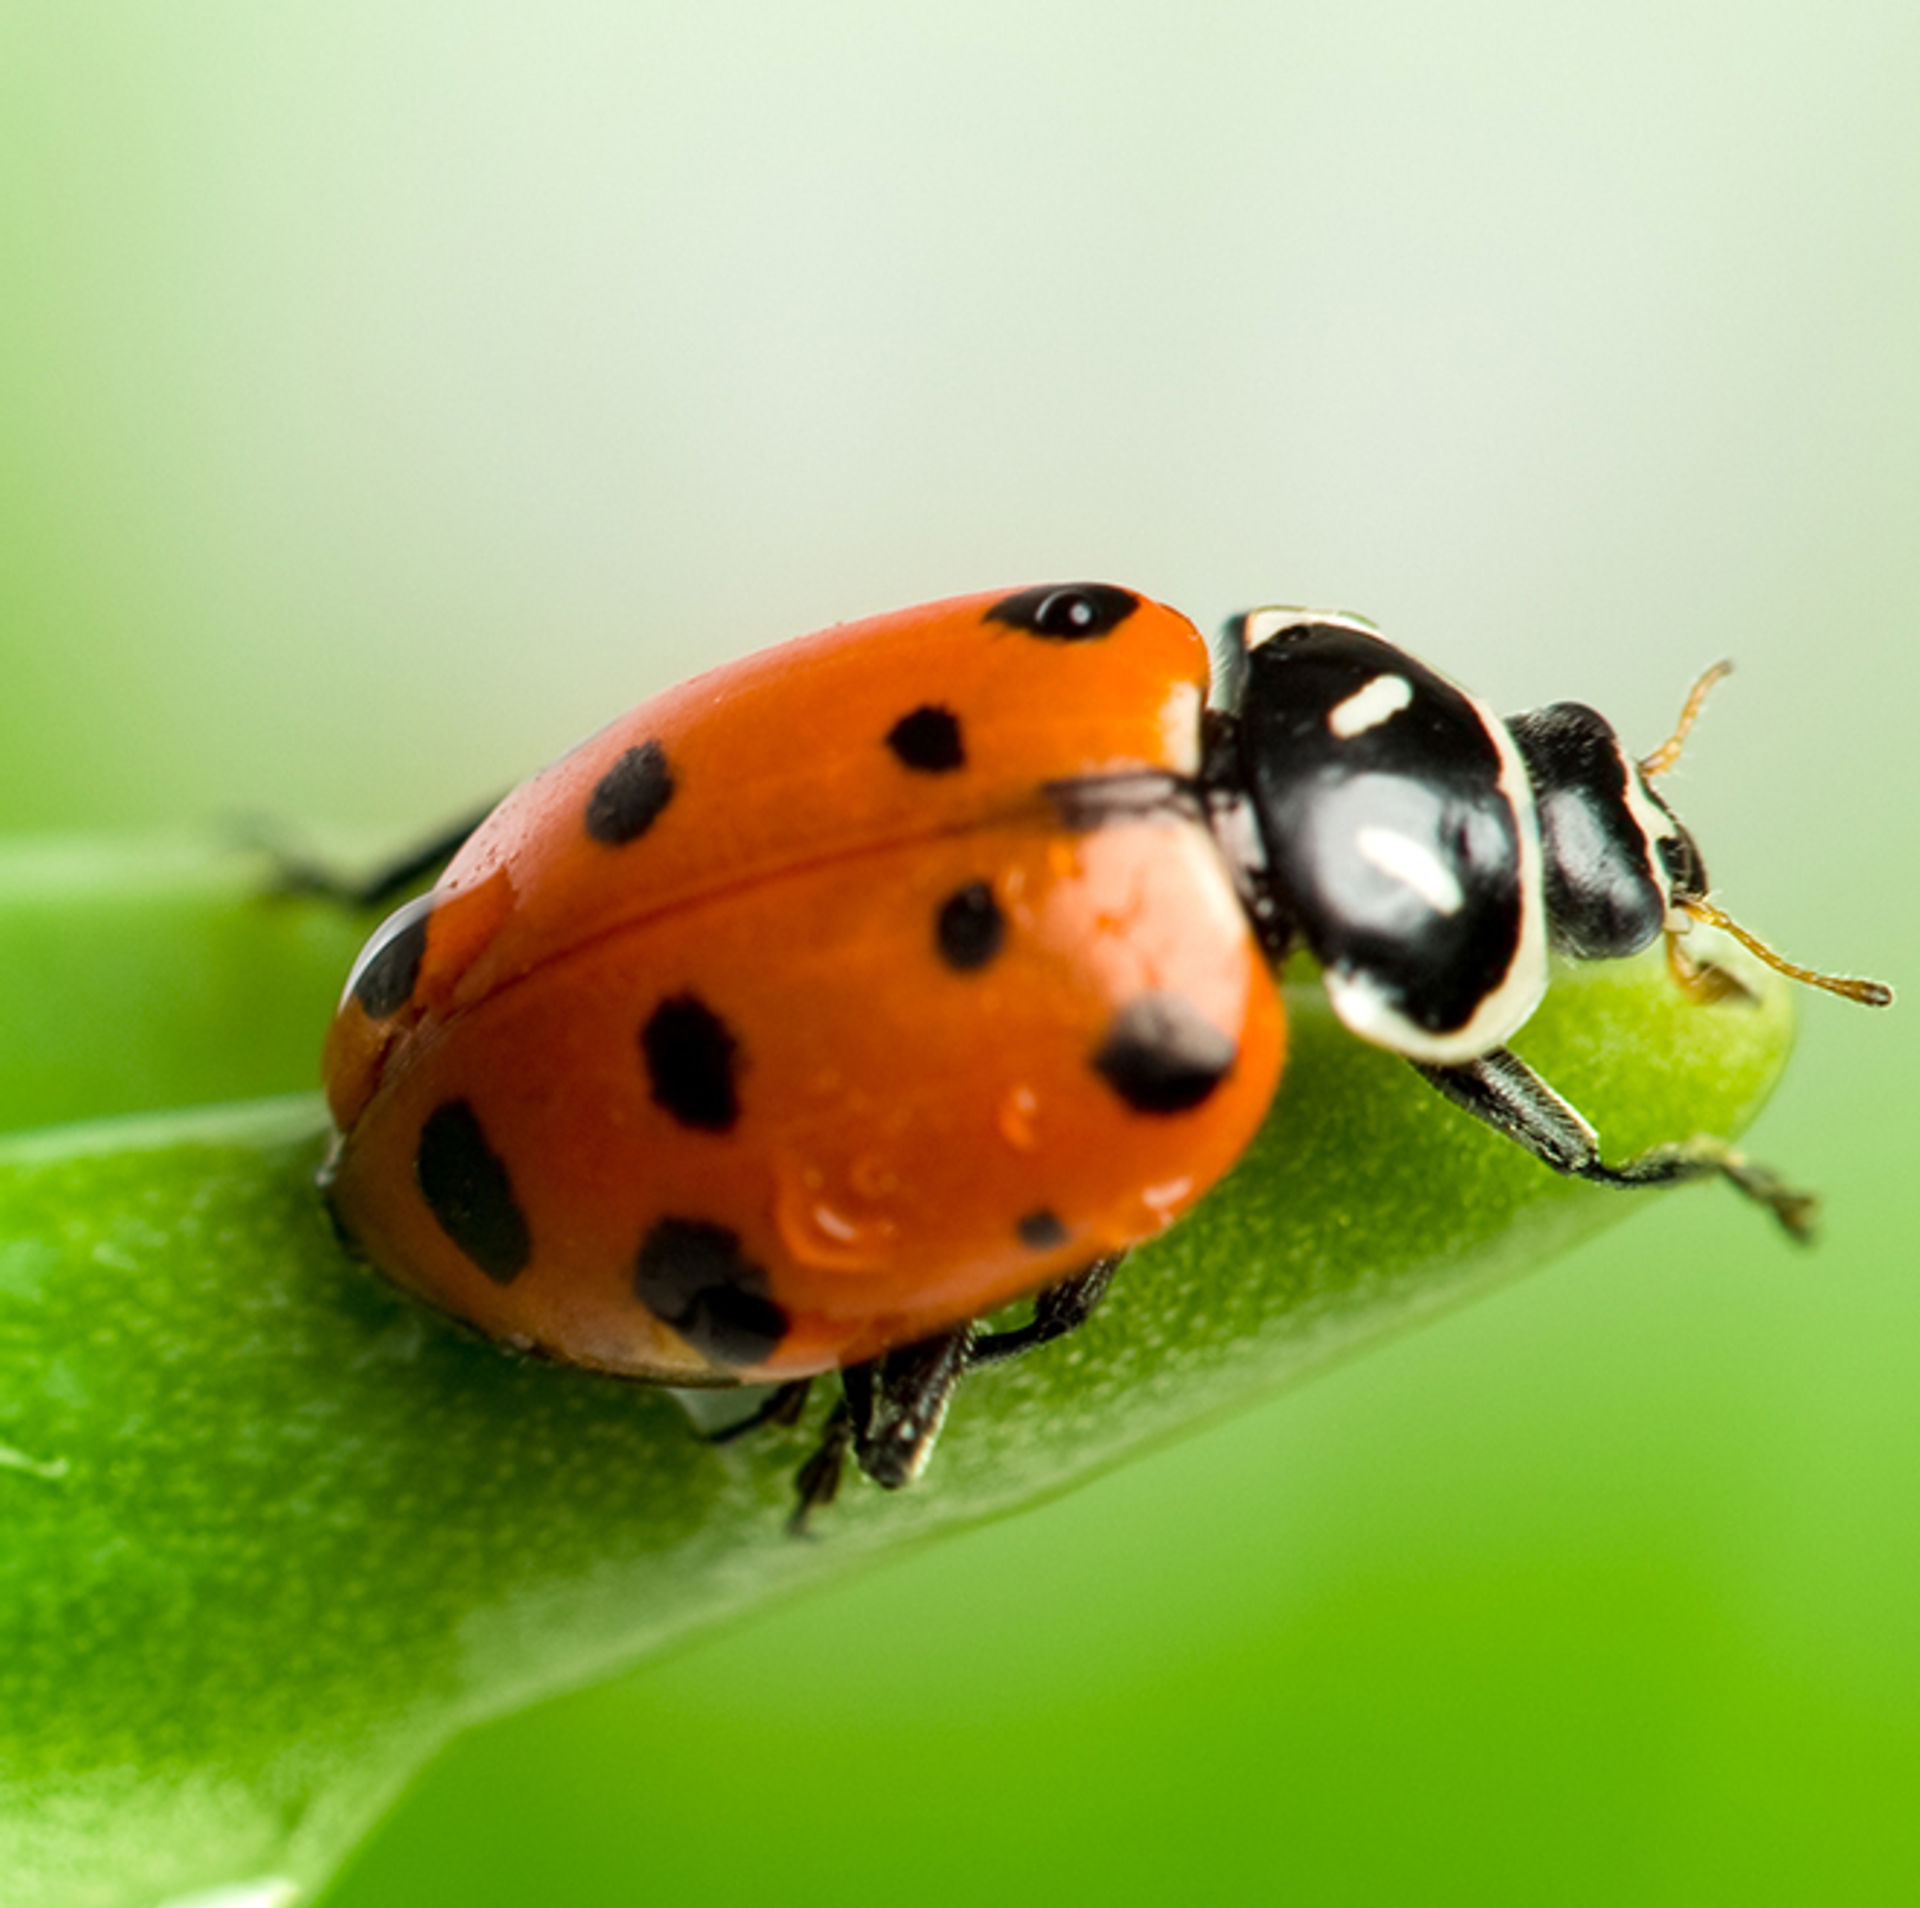 Convergent Lady Beetle on a green leaf